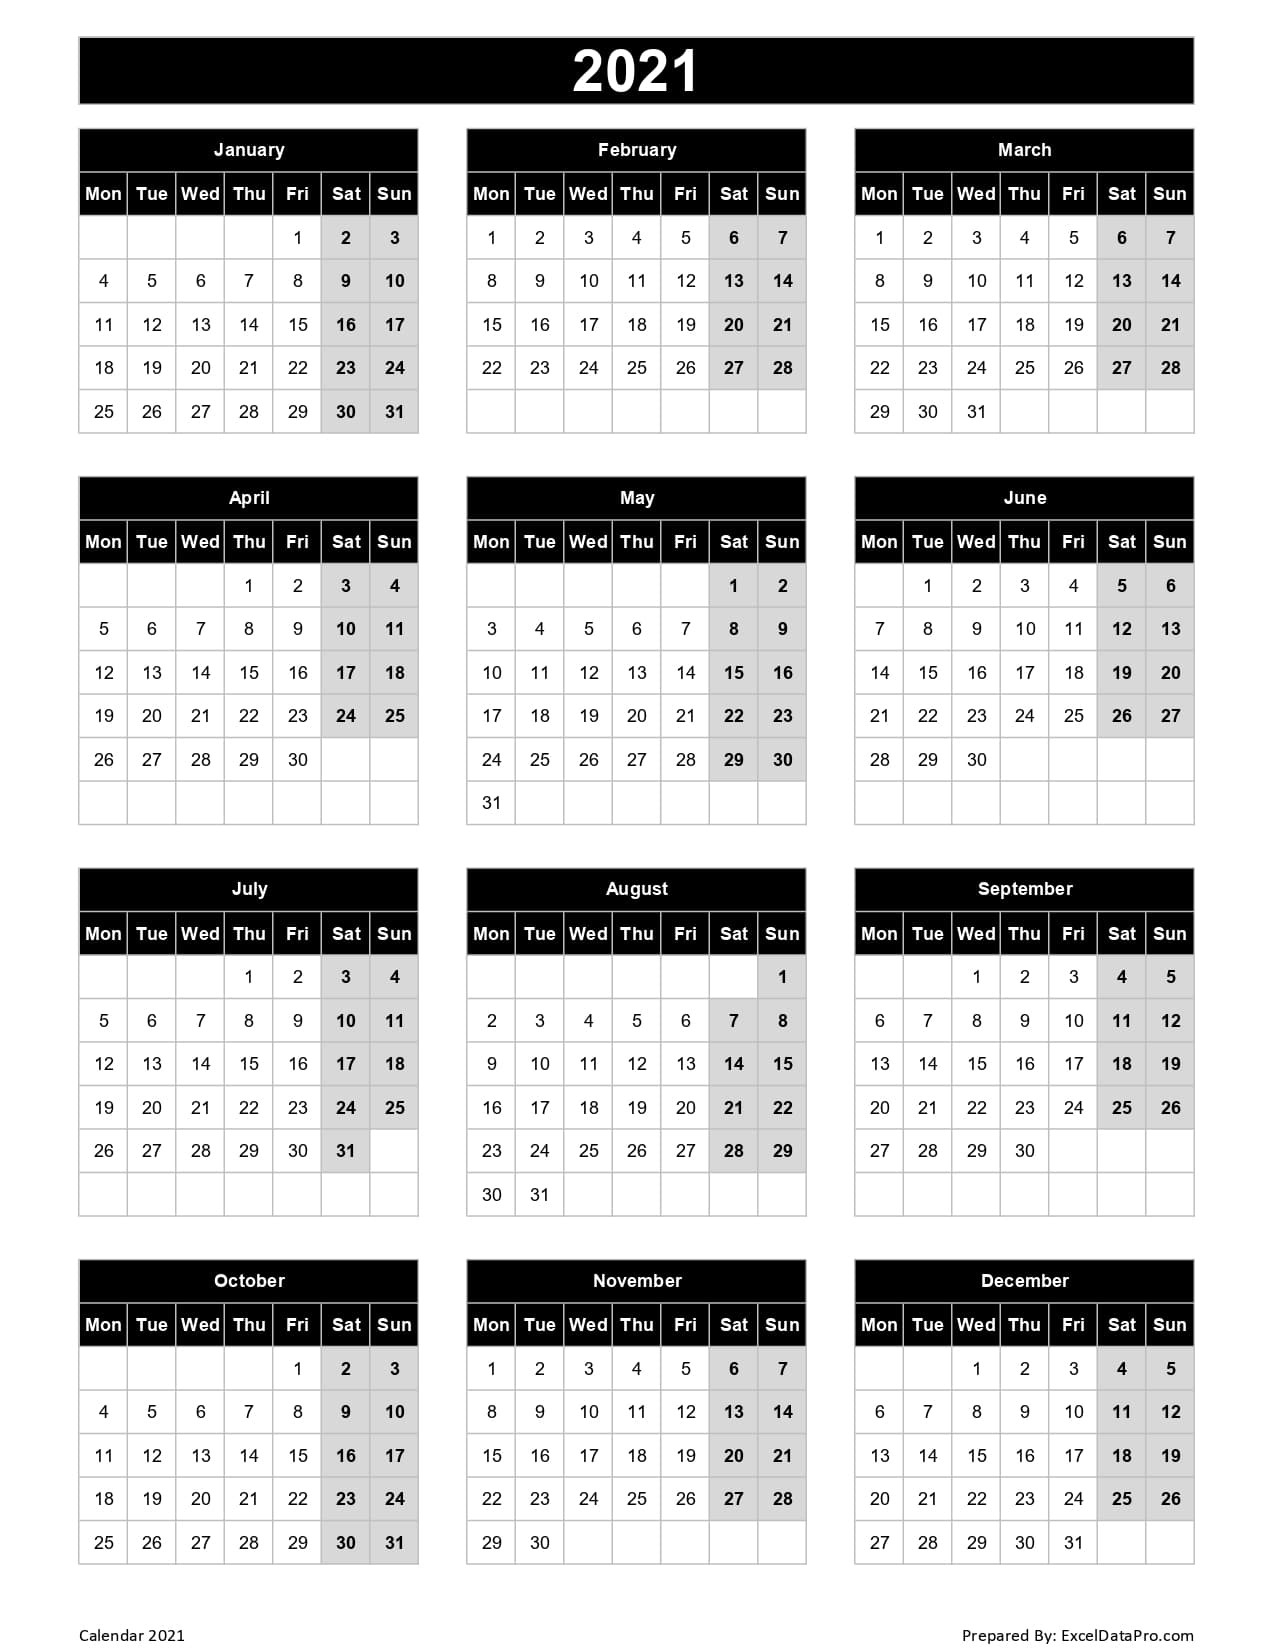 Download 2021 Yearly Calendar (Mon Start) Excel Template-Free Printable Calendar 2021 In 4X6